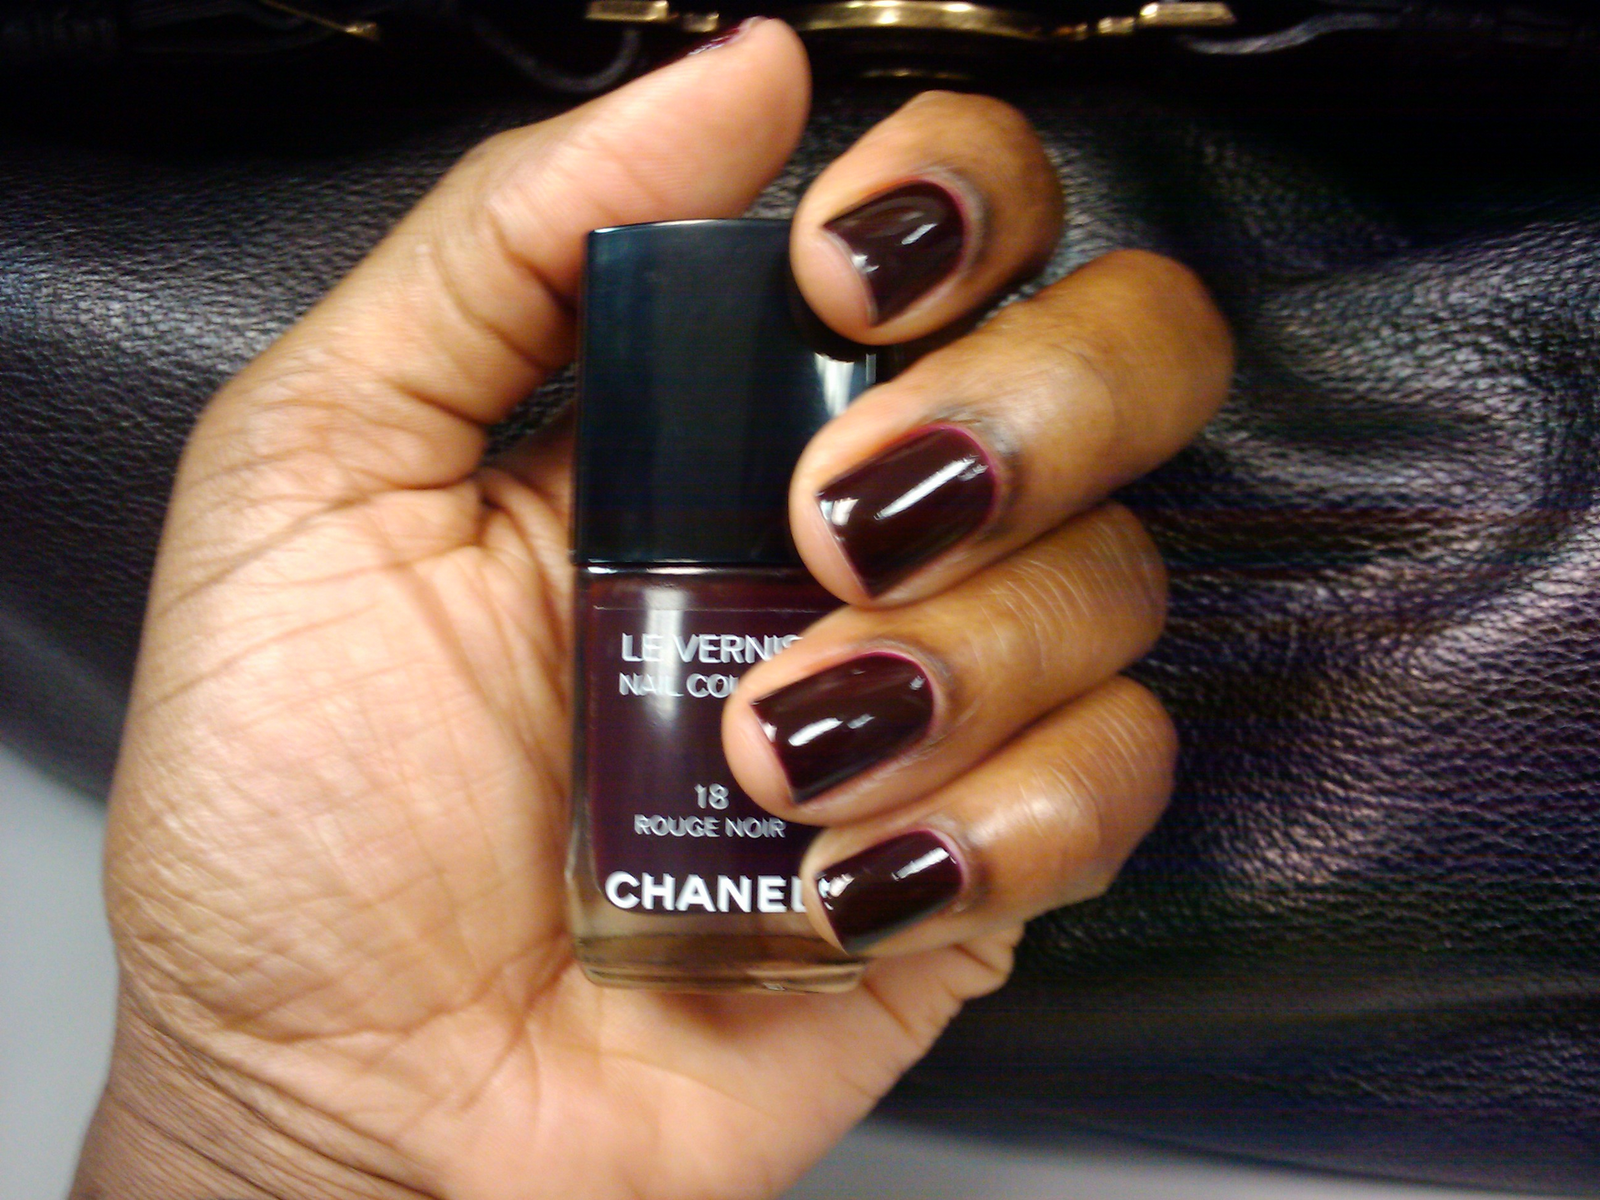 Chanel Rouge Noir- Mani of the Week & Chanel Coromandel, Chanel Pirate and Chanel  Black Satin - of the comely